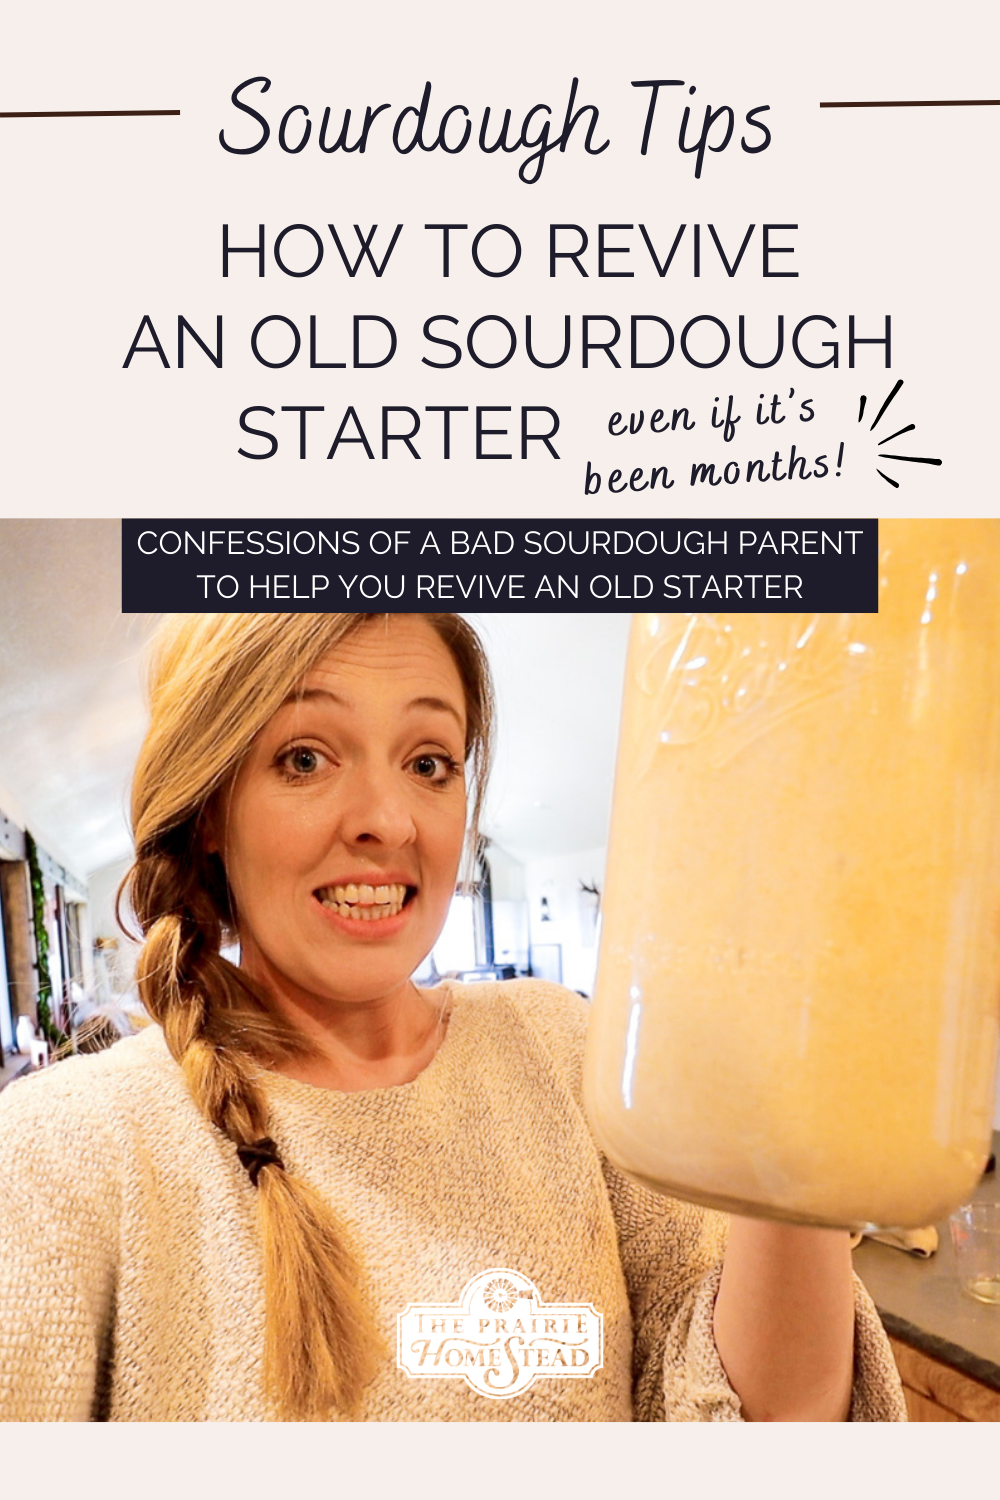 How to Revive an Old Sourdough Starter